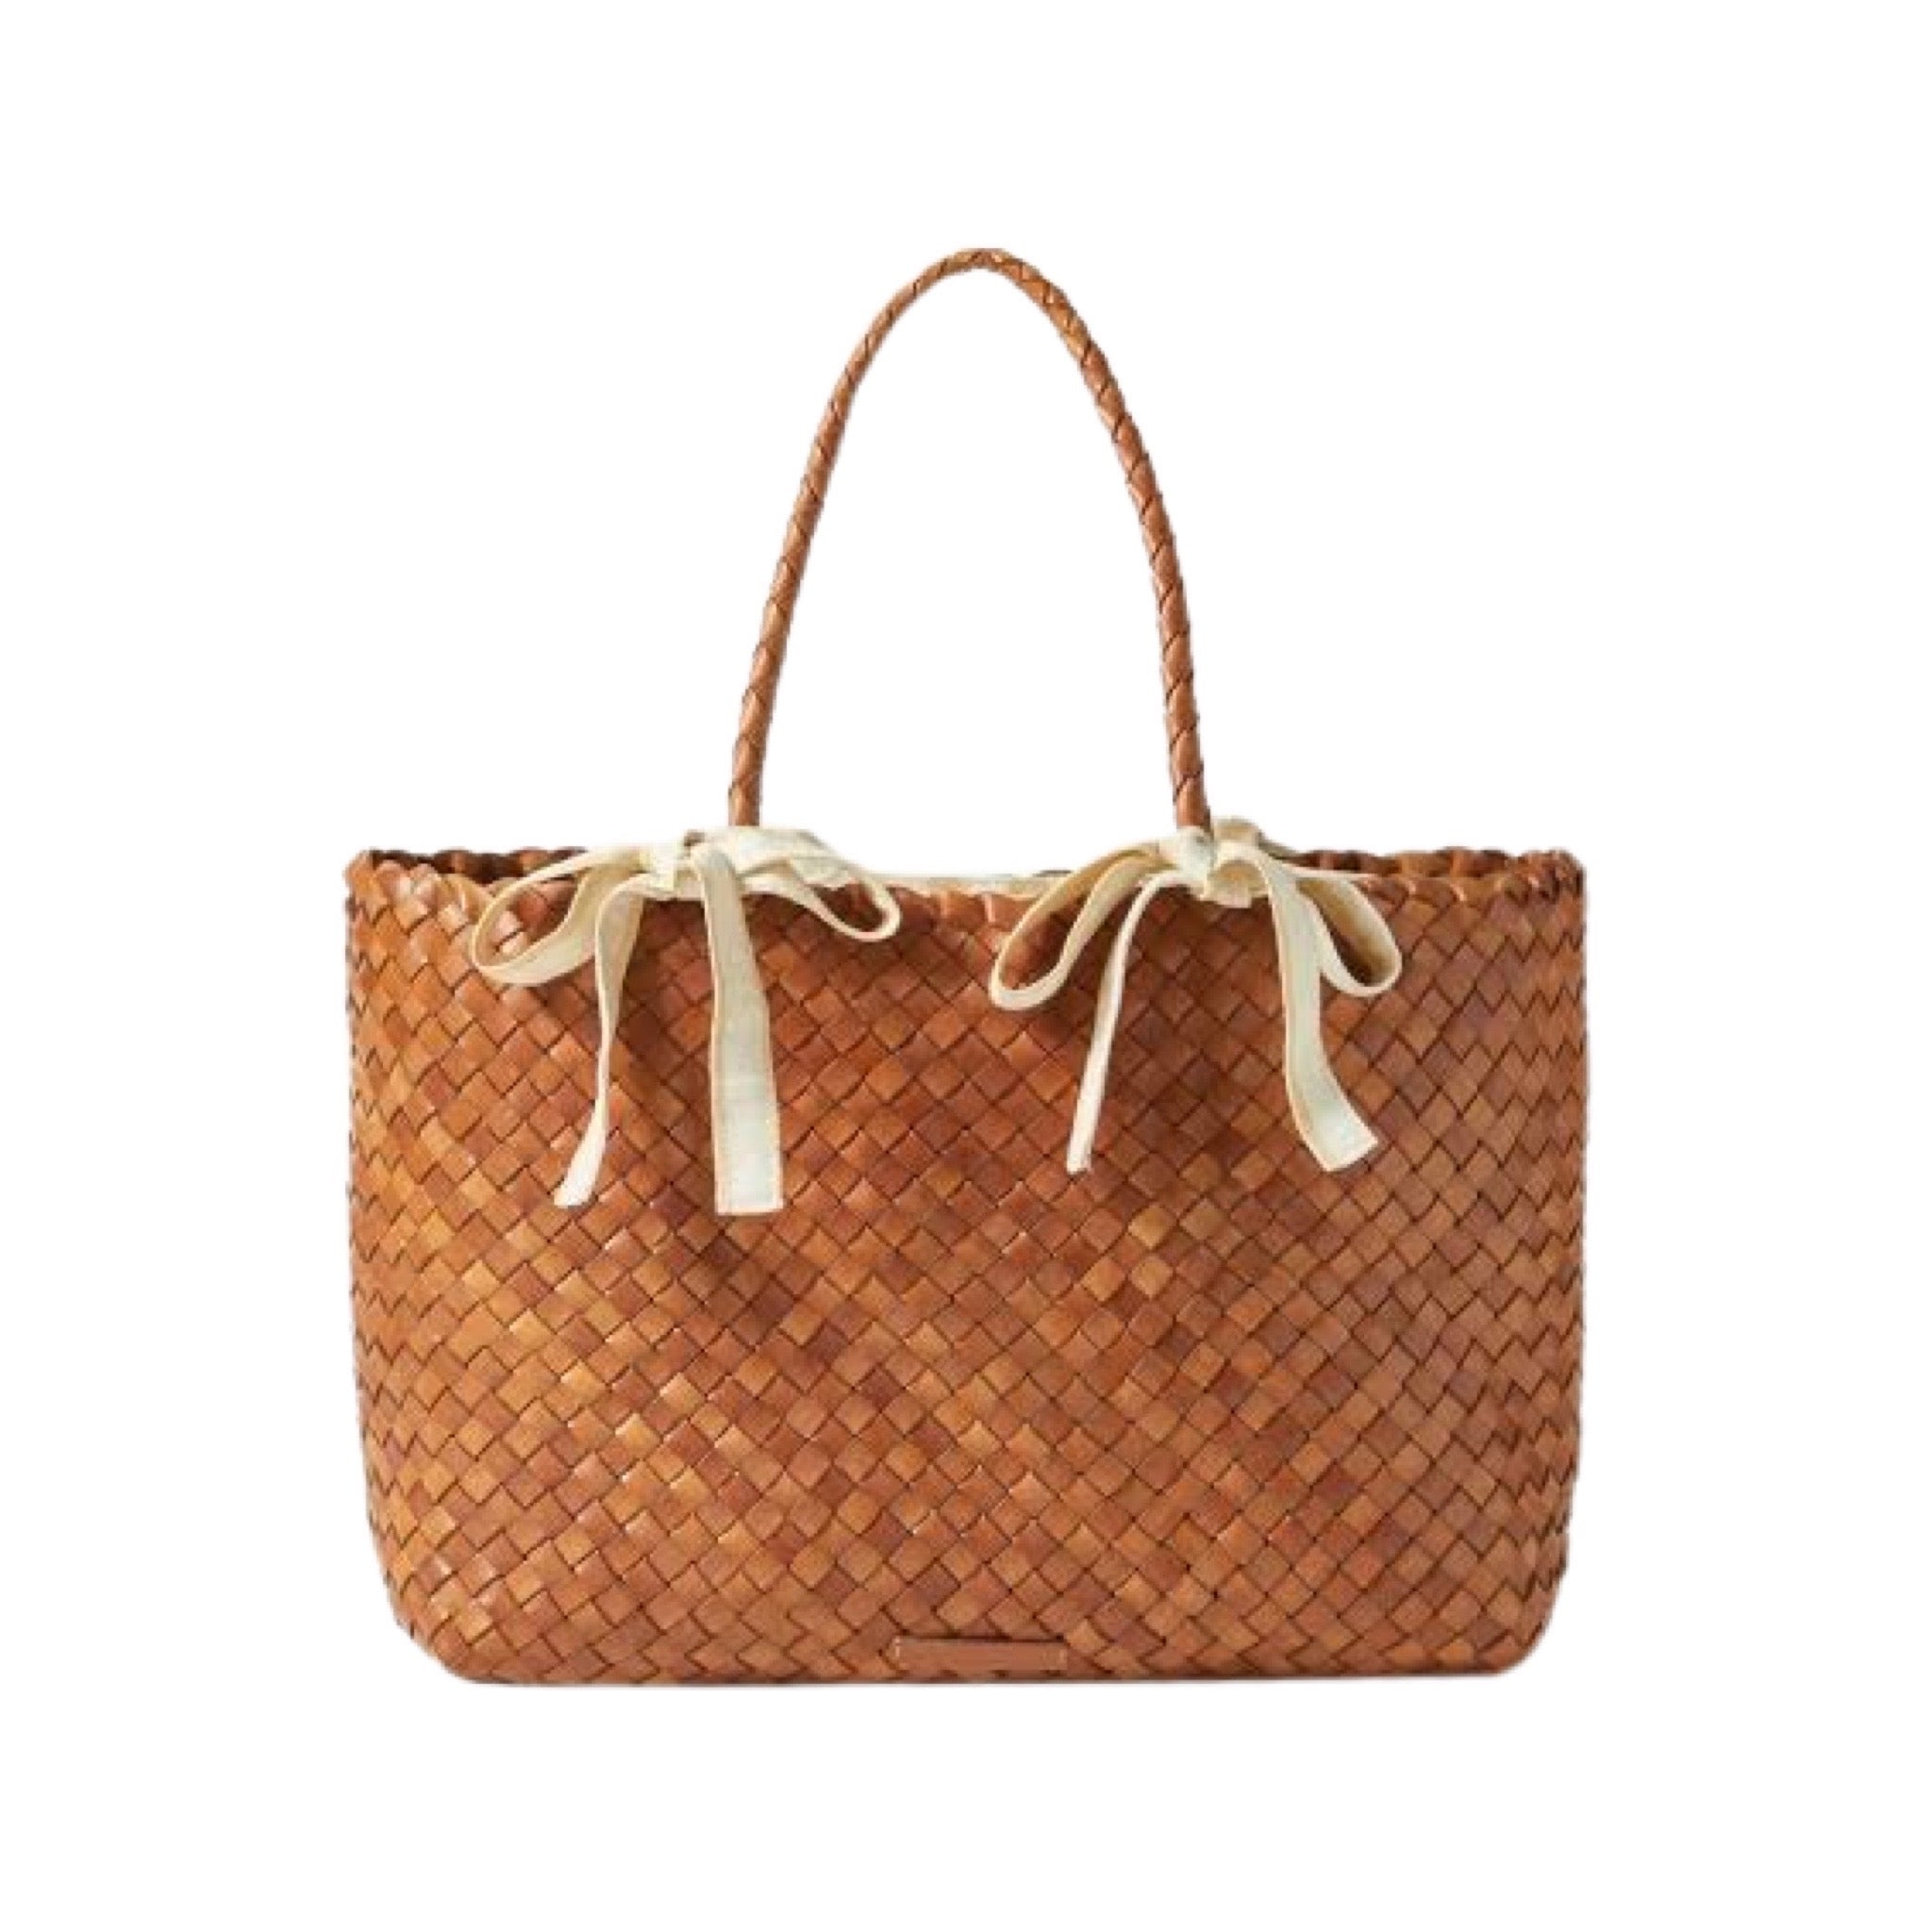 LARGE WOVEN TOTE